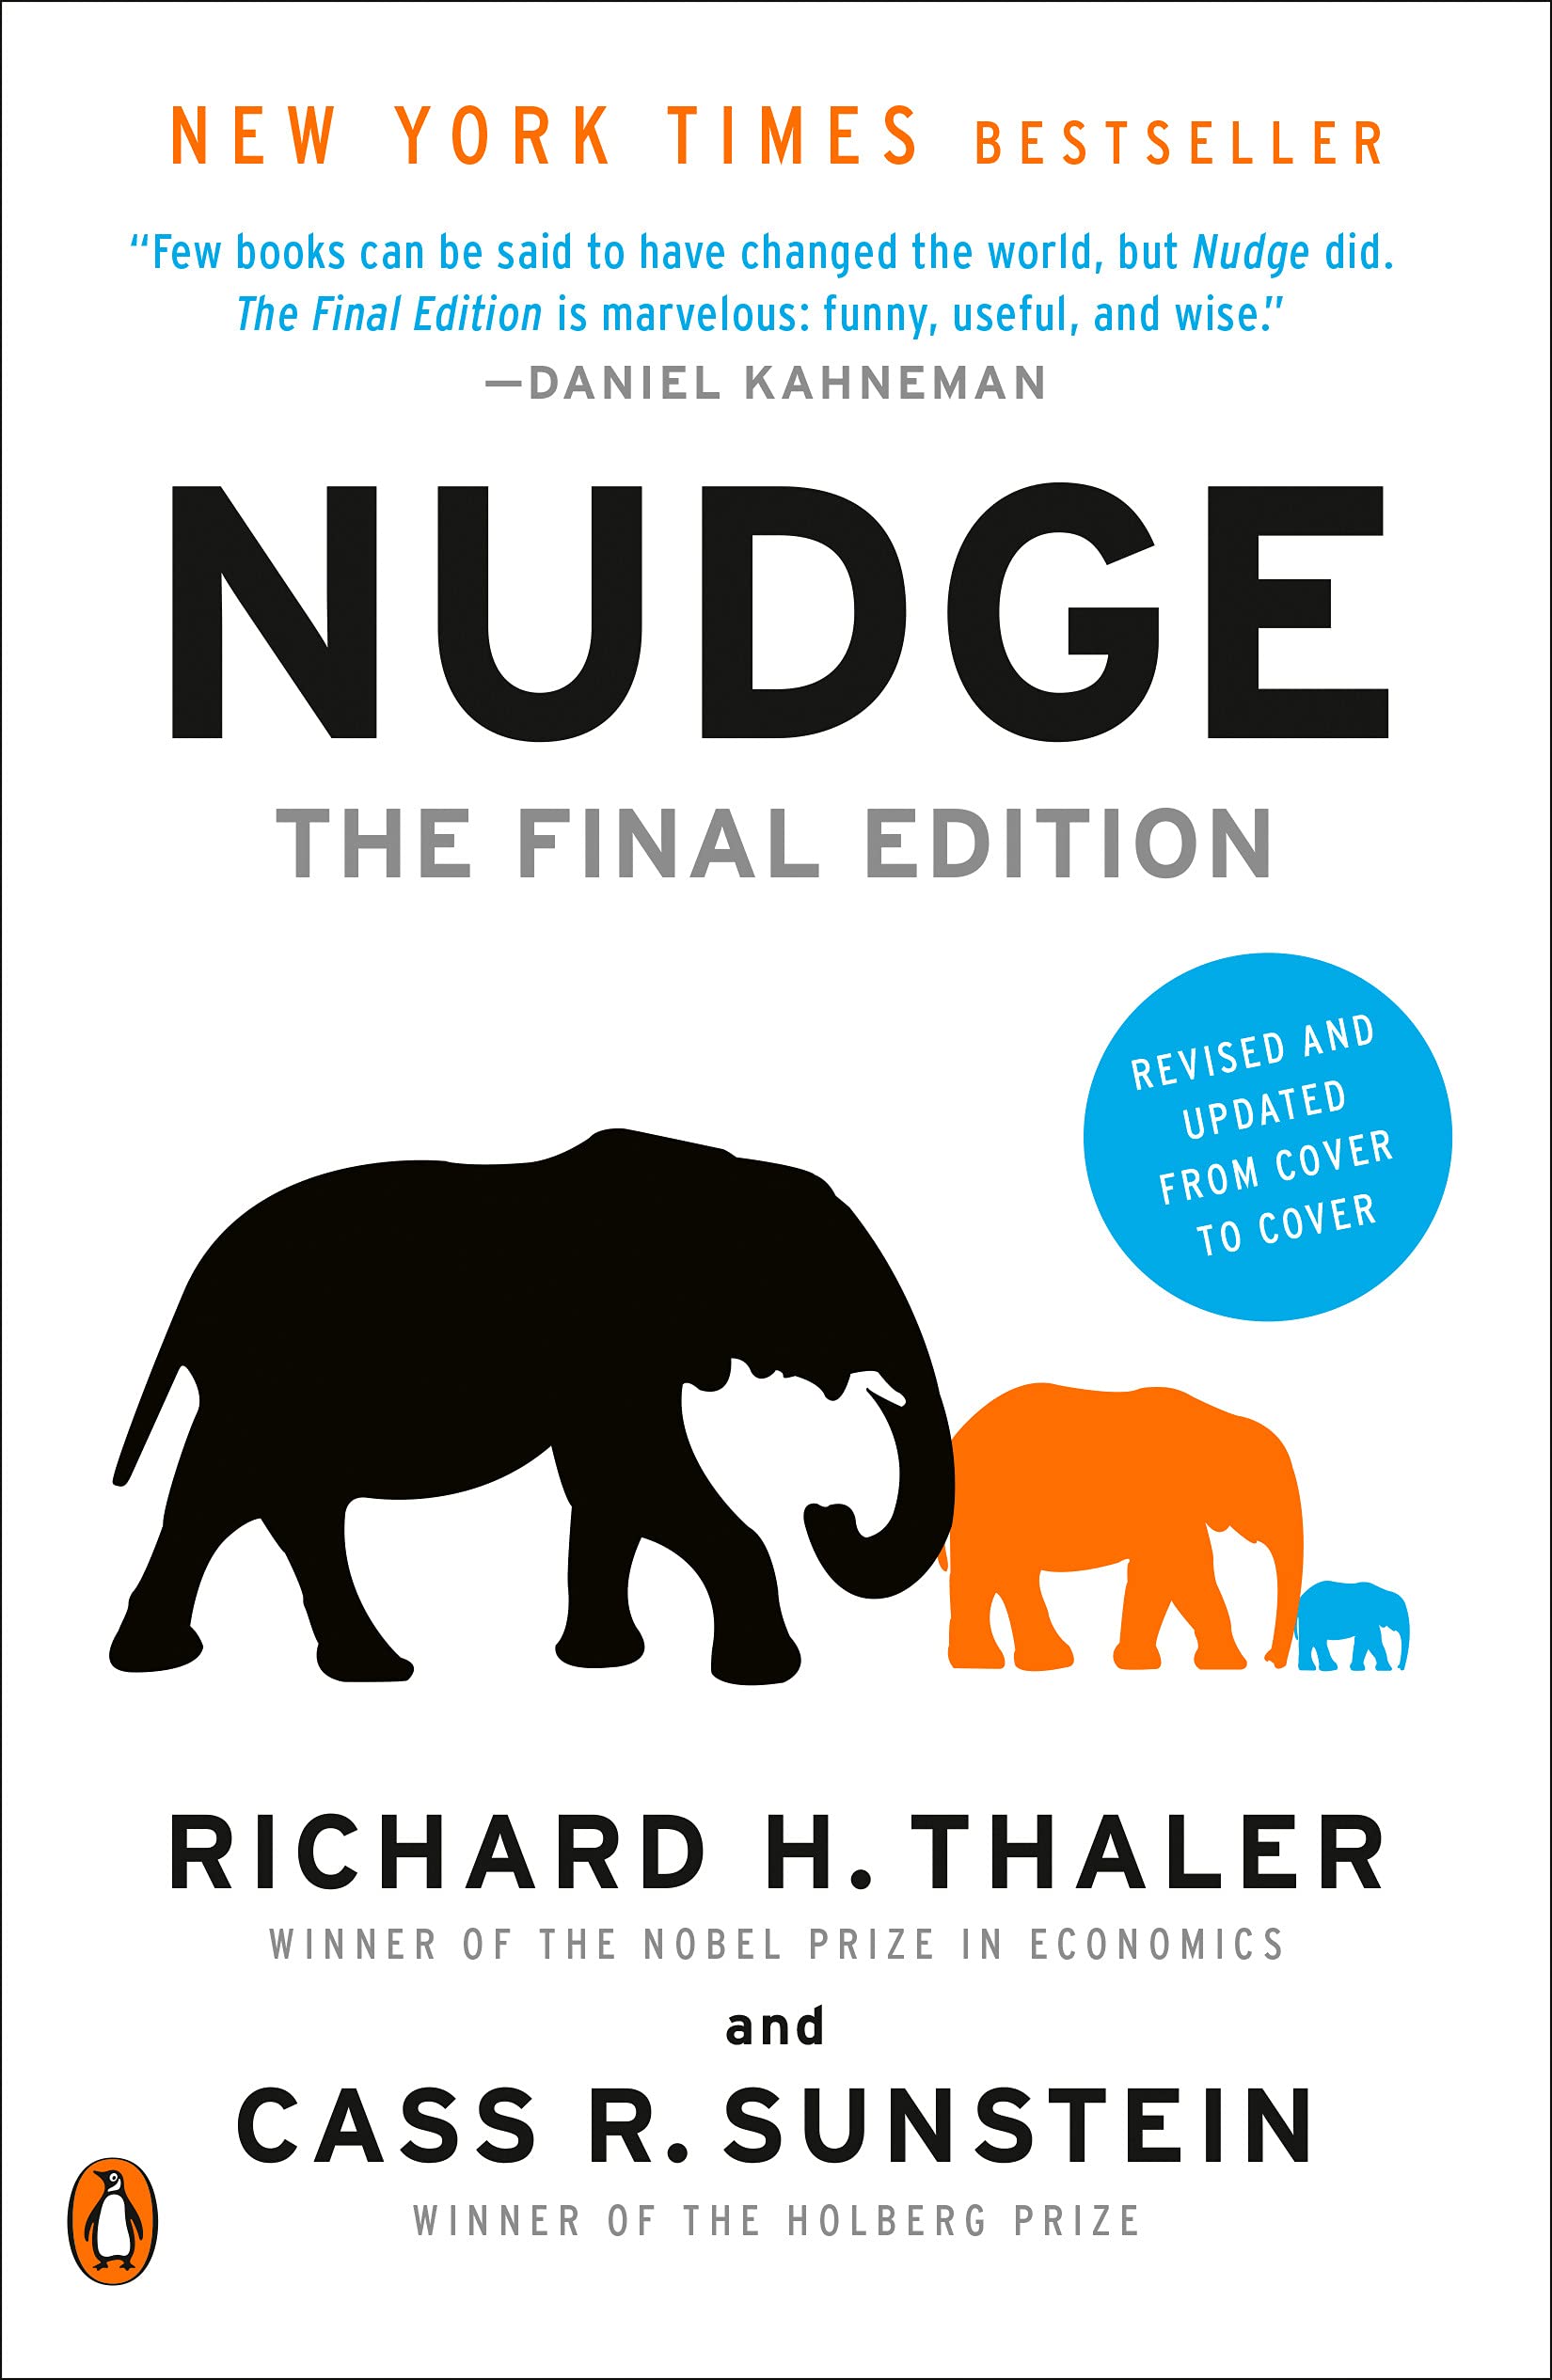 Nudge: Improving Decisions About Health, Wealth, and Happiness by Richard H. Thaler and Cass R. Sunstein (2008)